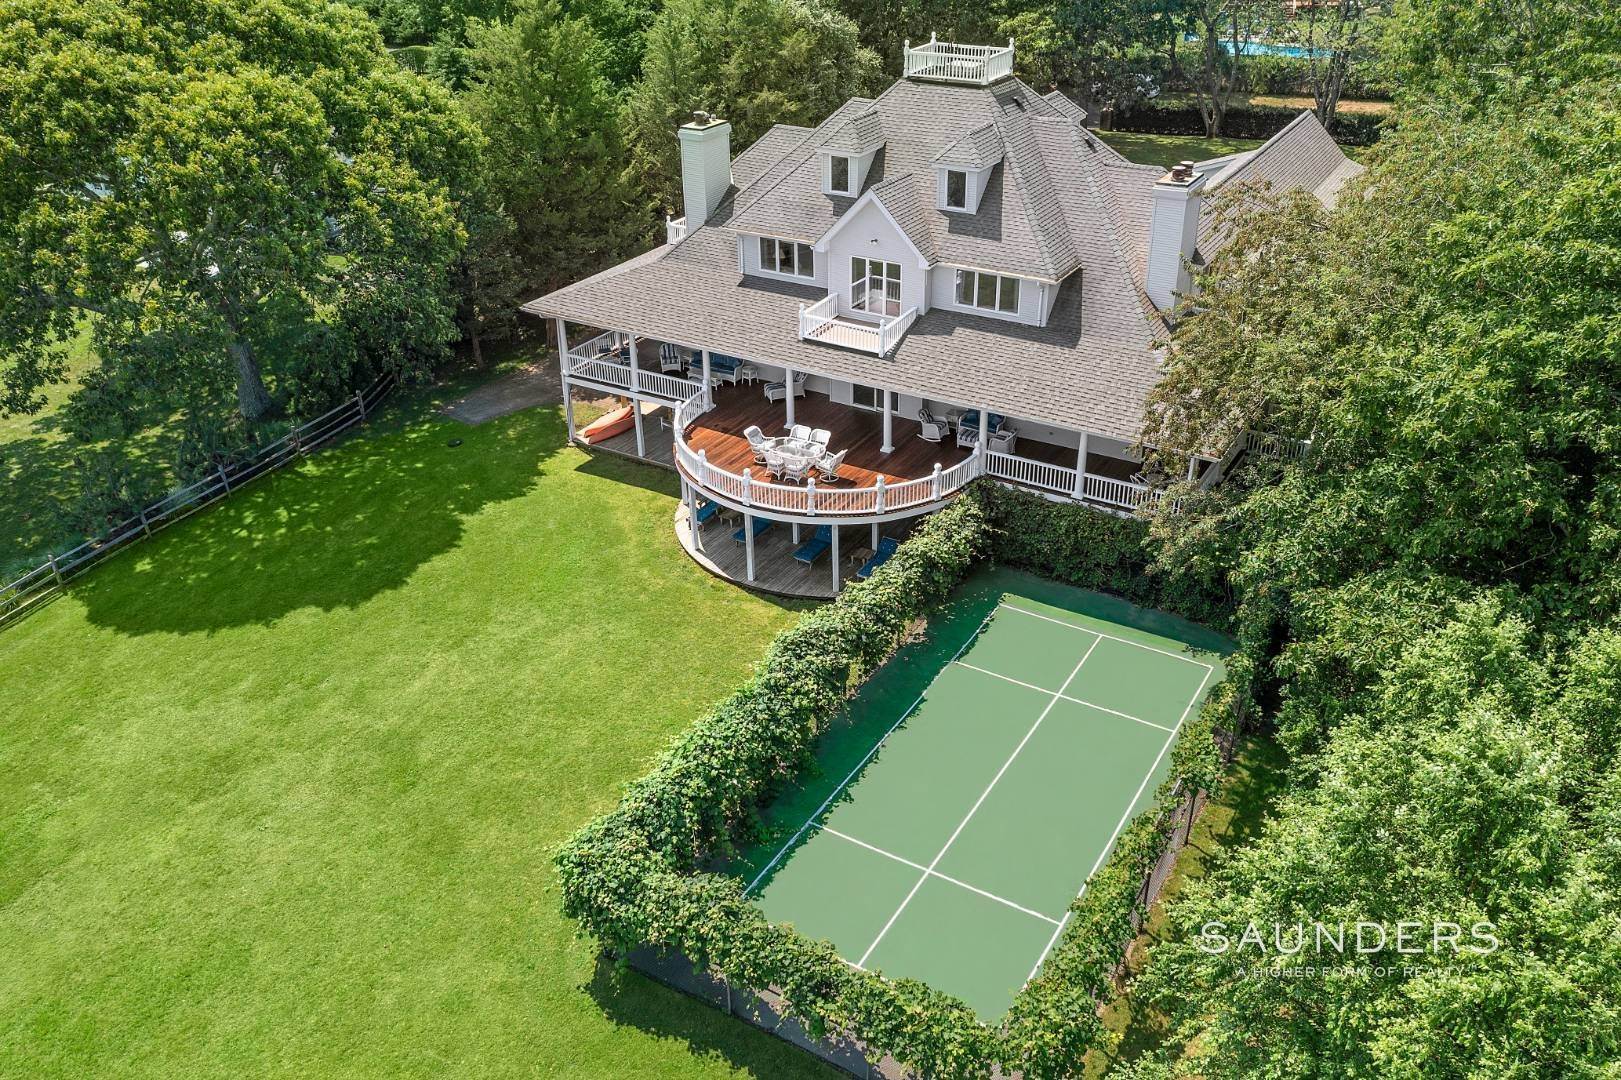 3. Single Family Homes for Sale at Estate Section Compound With Deep Water Dock, Sandy Beach, Pool 58 Westmoreland Drive, Shelter Island, NY 11964